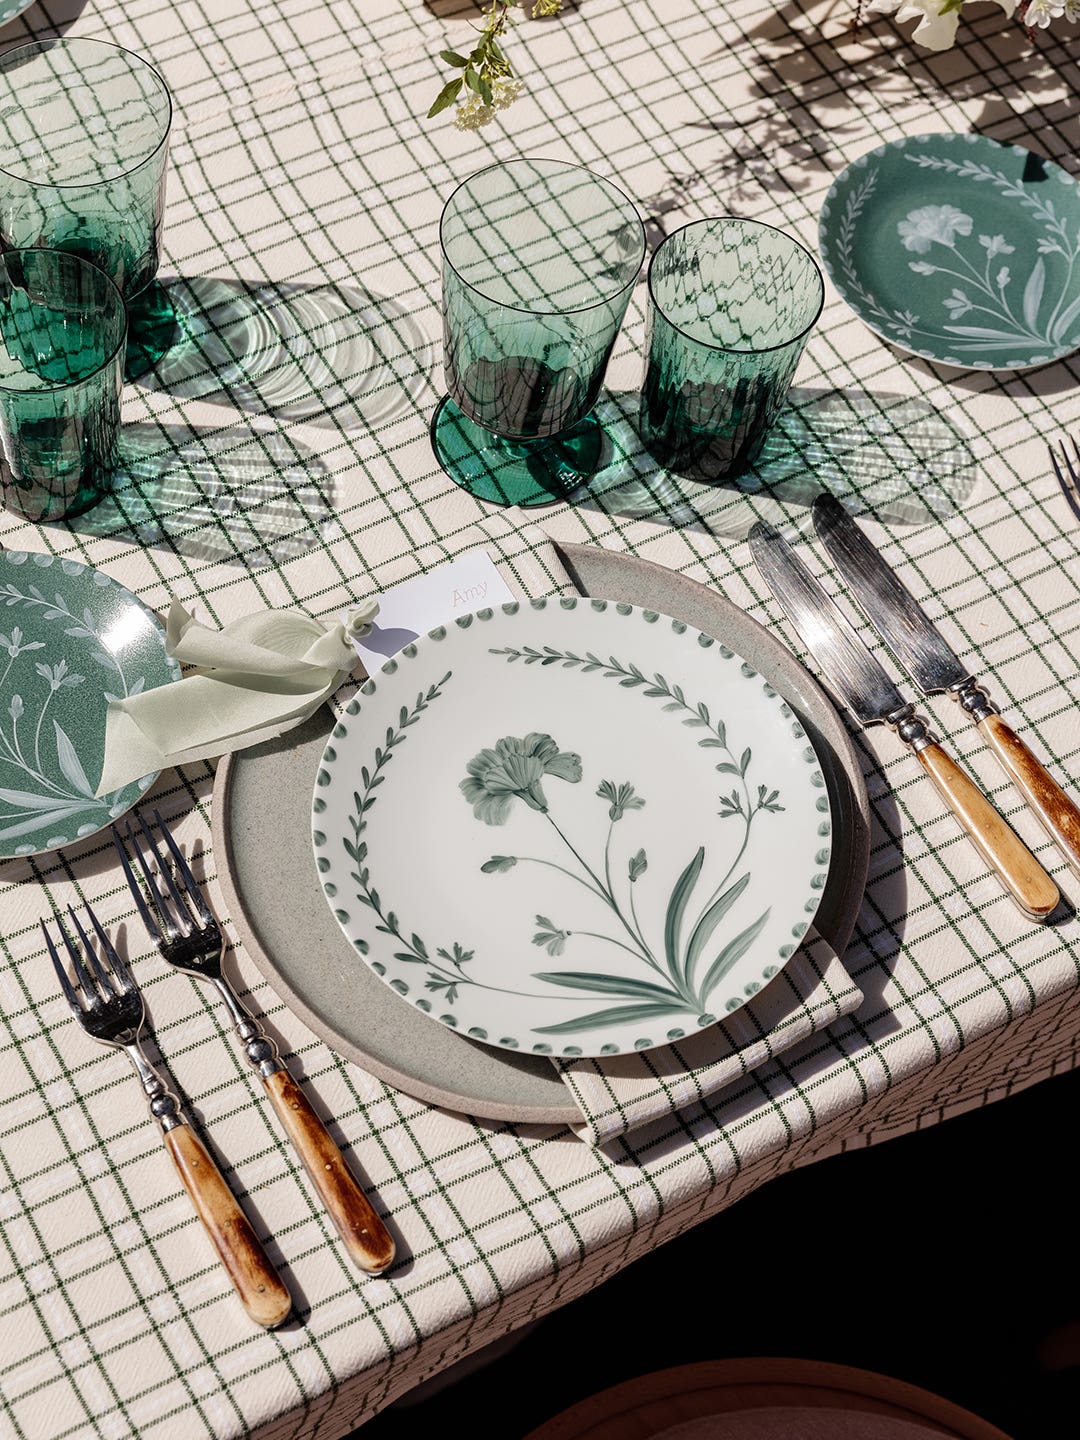 Set Your Dinner Table for Spring to Lift Your Spirits